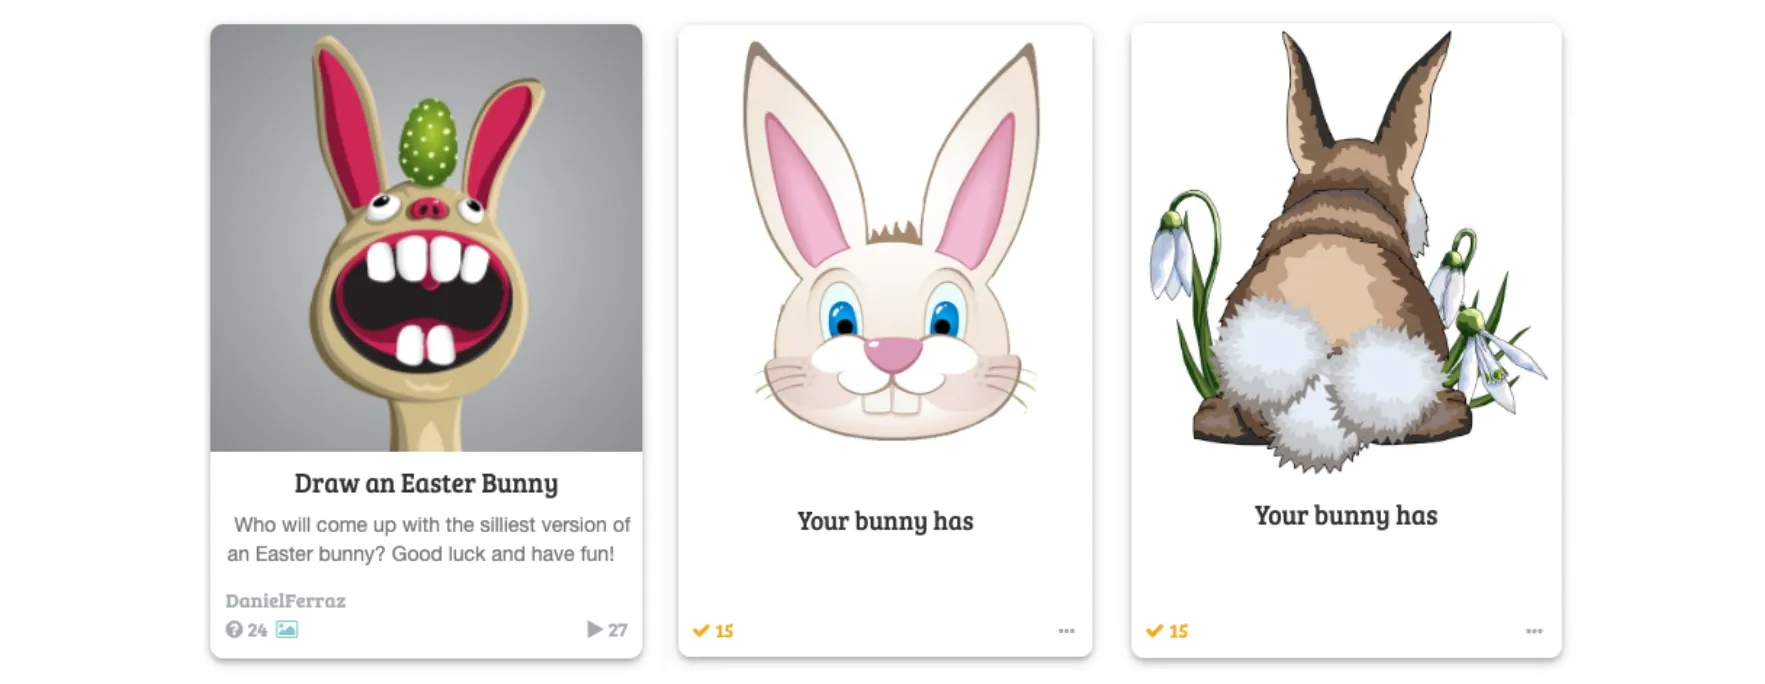 Draw an Easter Bunny game on Baamboozle